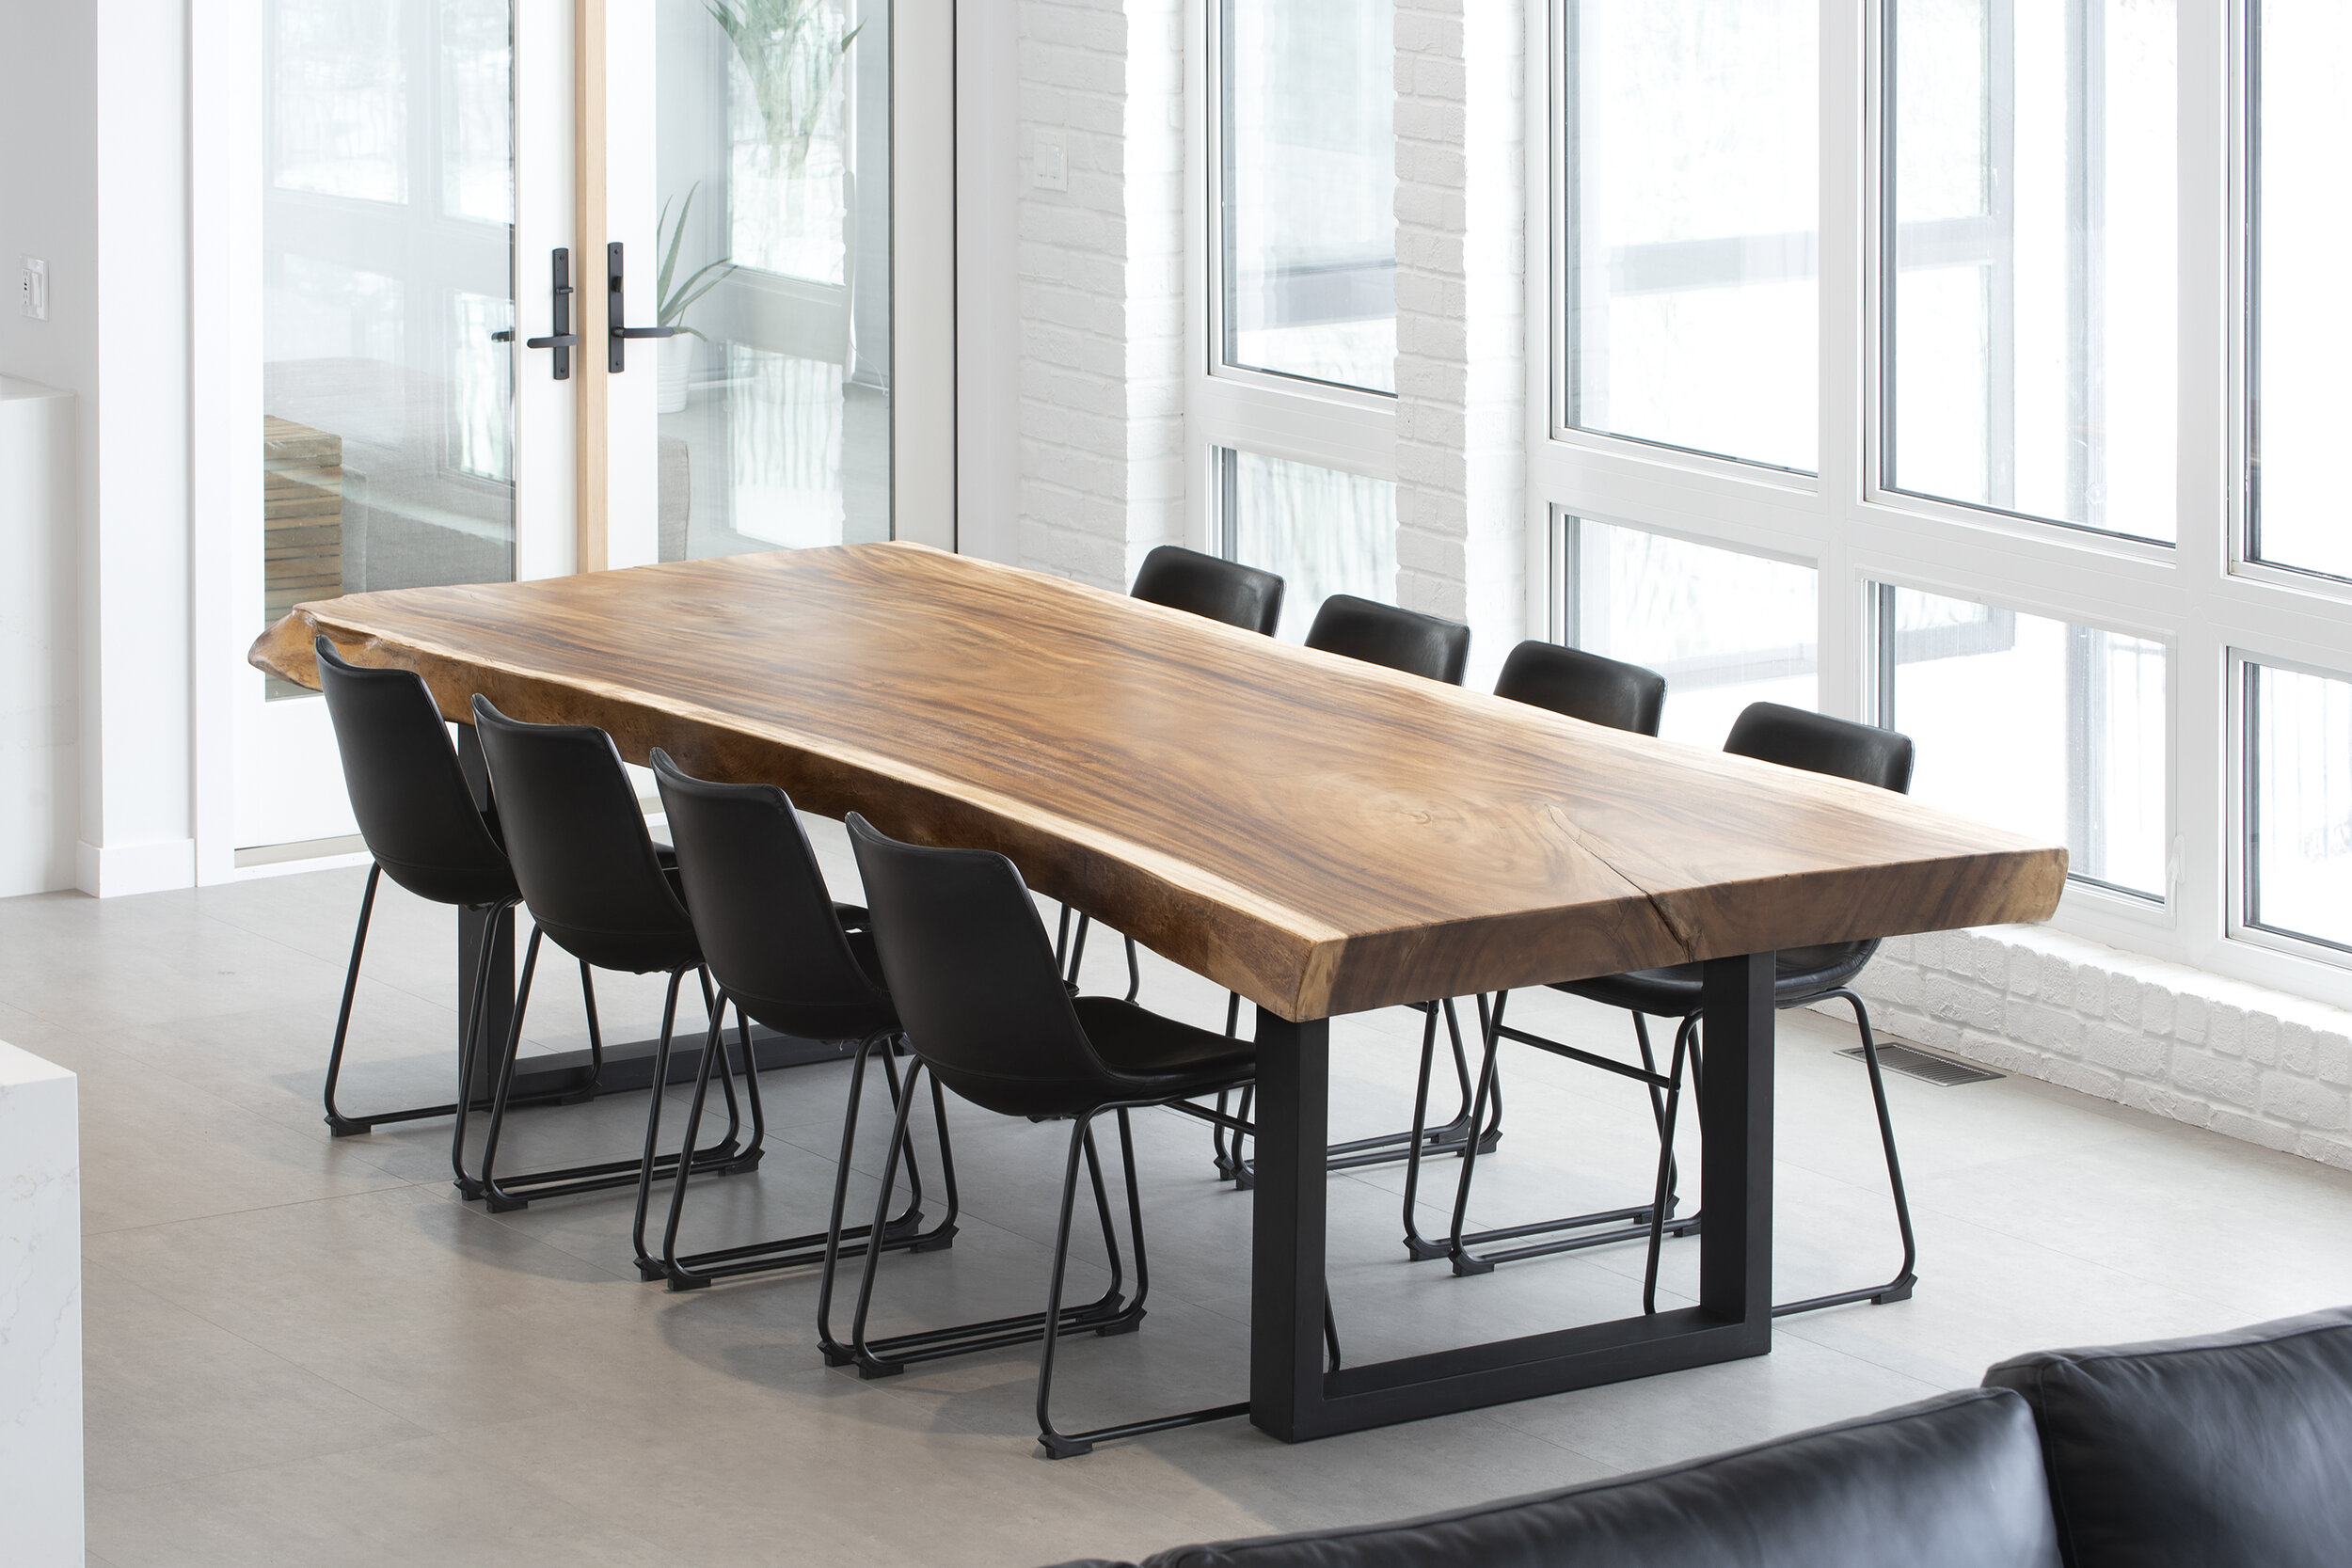 Authentically Sculpted Wood Furniture, Solid Wood Dining Room Tables Canada